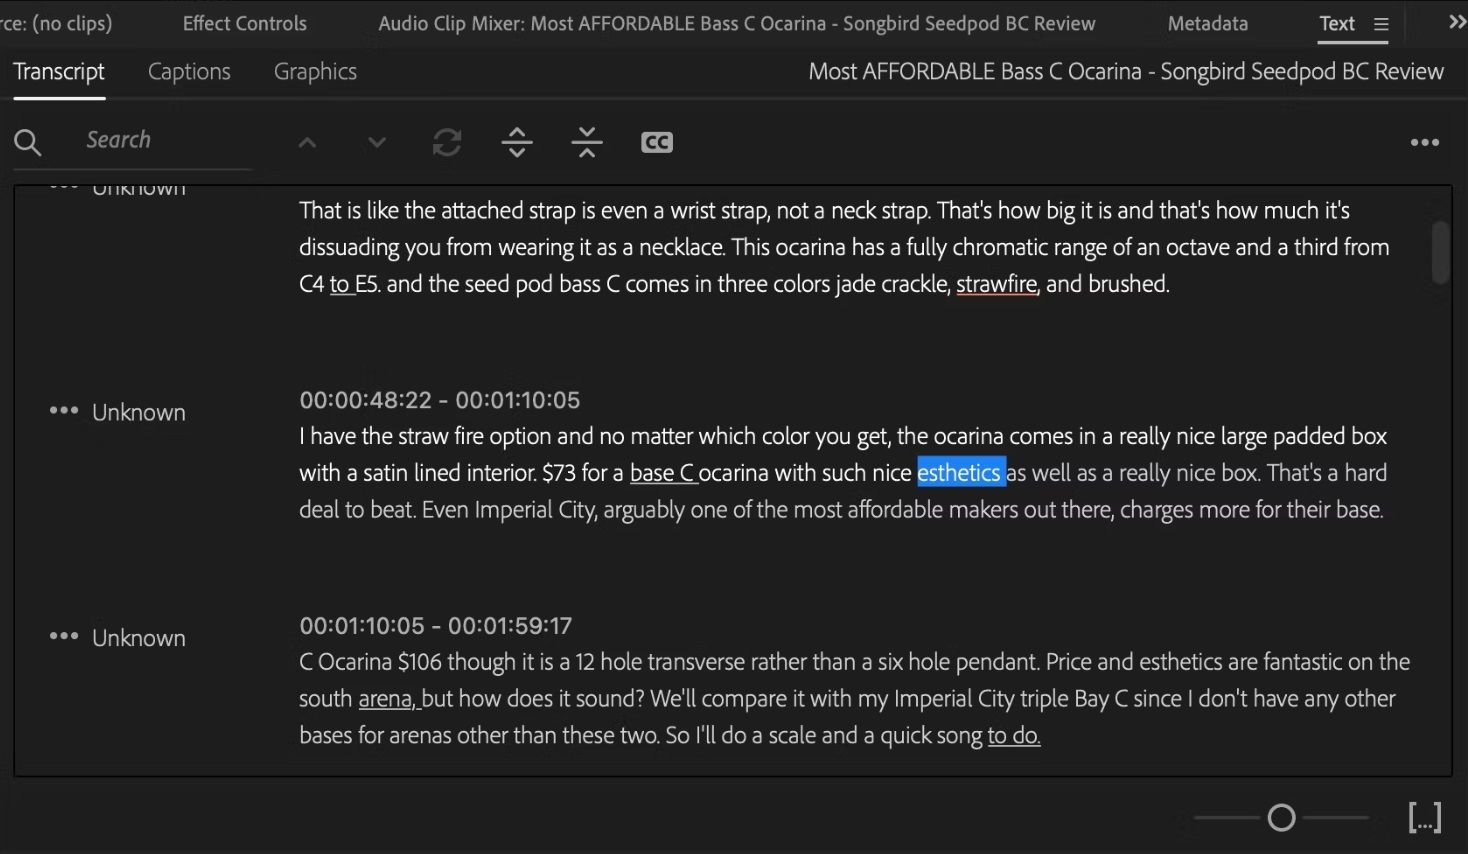 Premiere Pro speech to text transcription with mistake highlighted